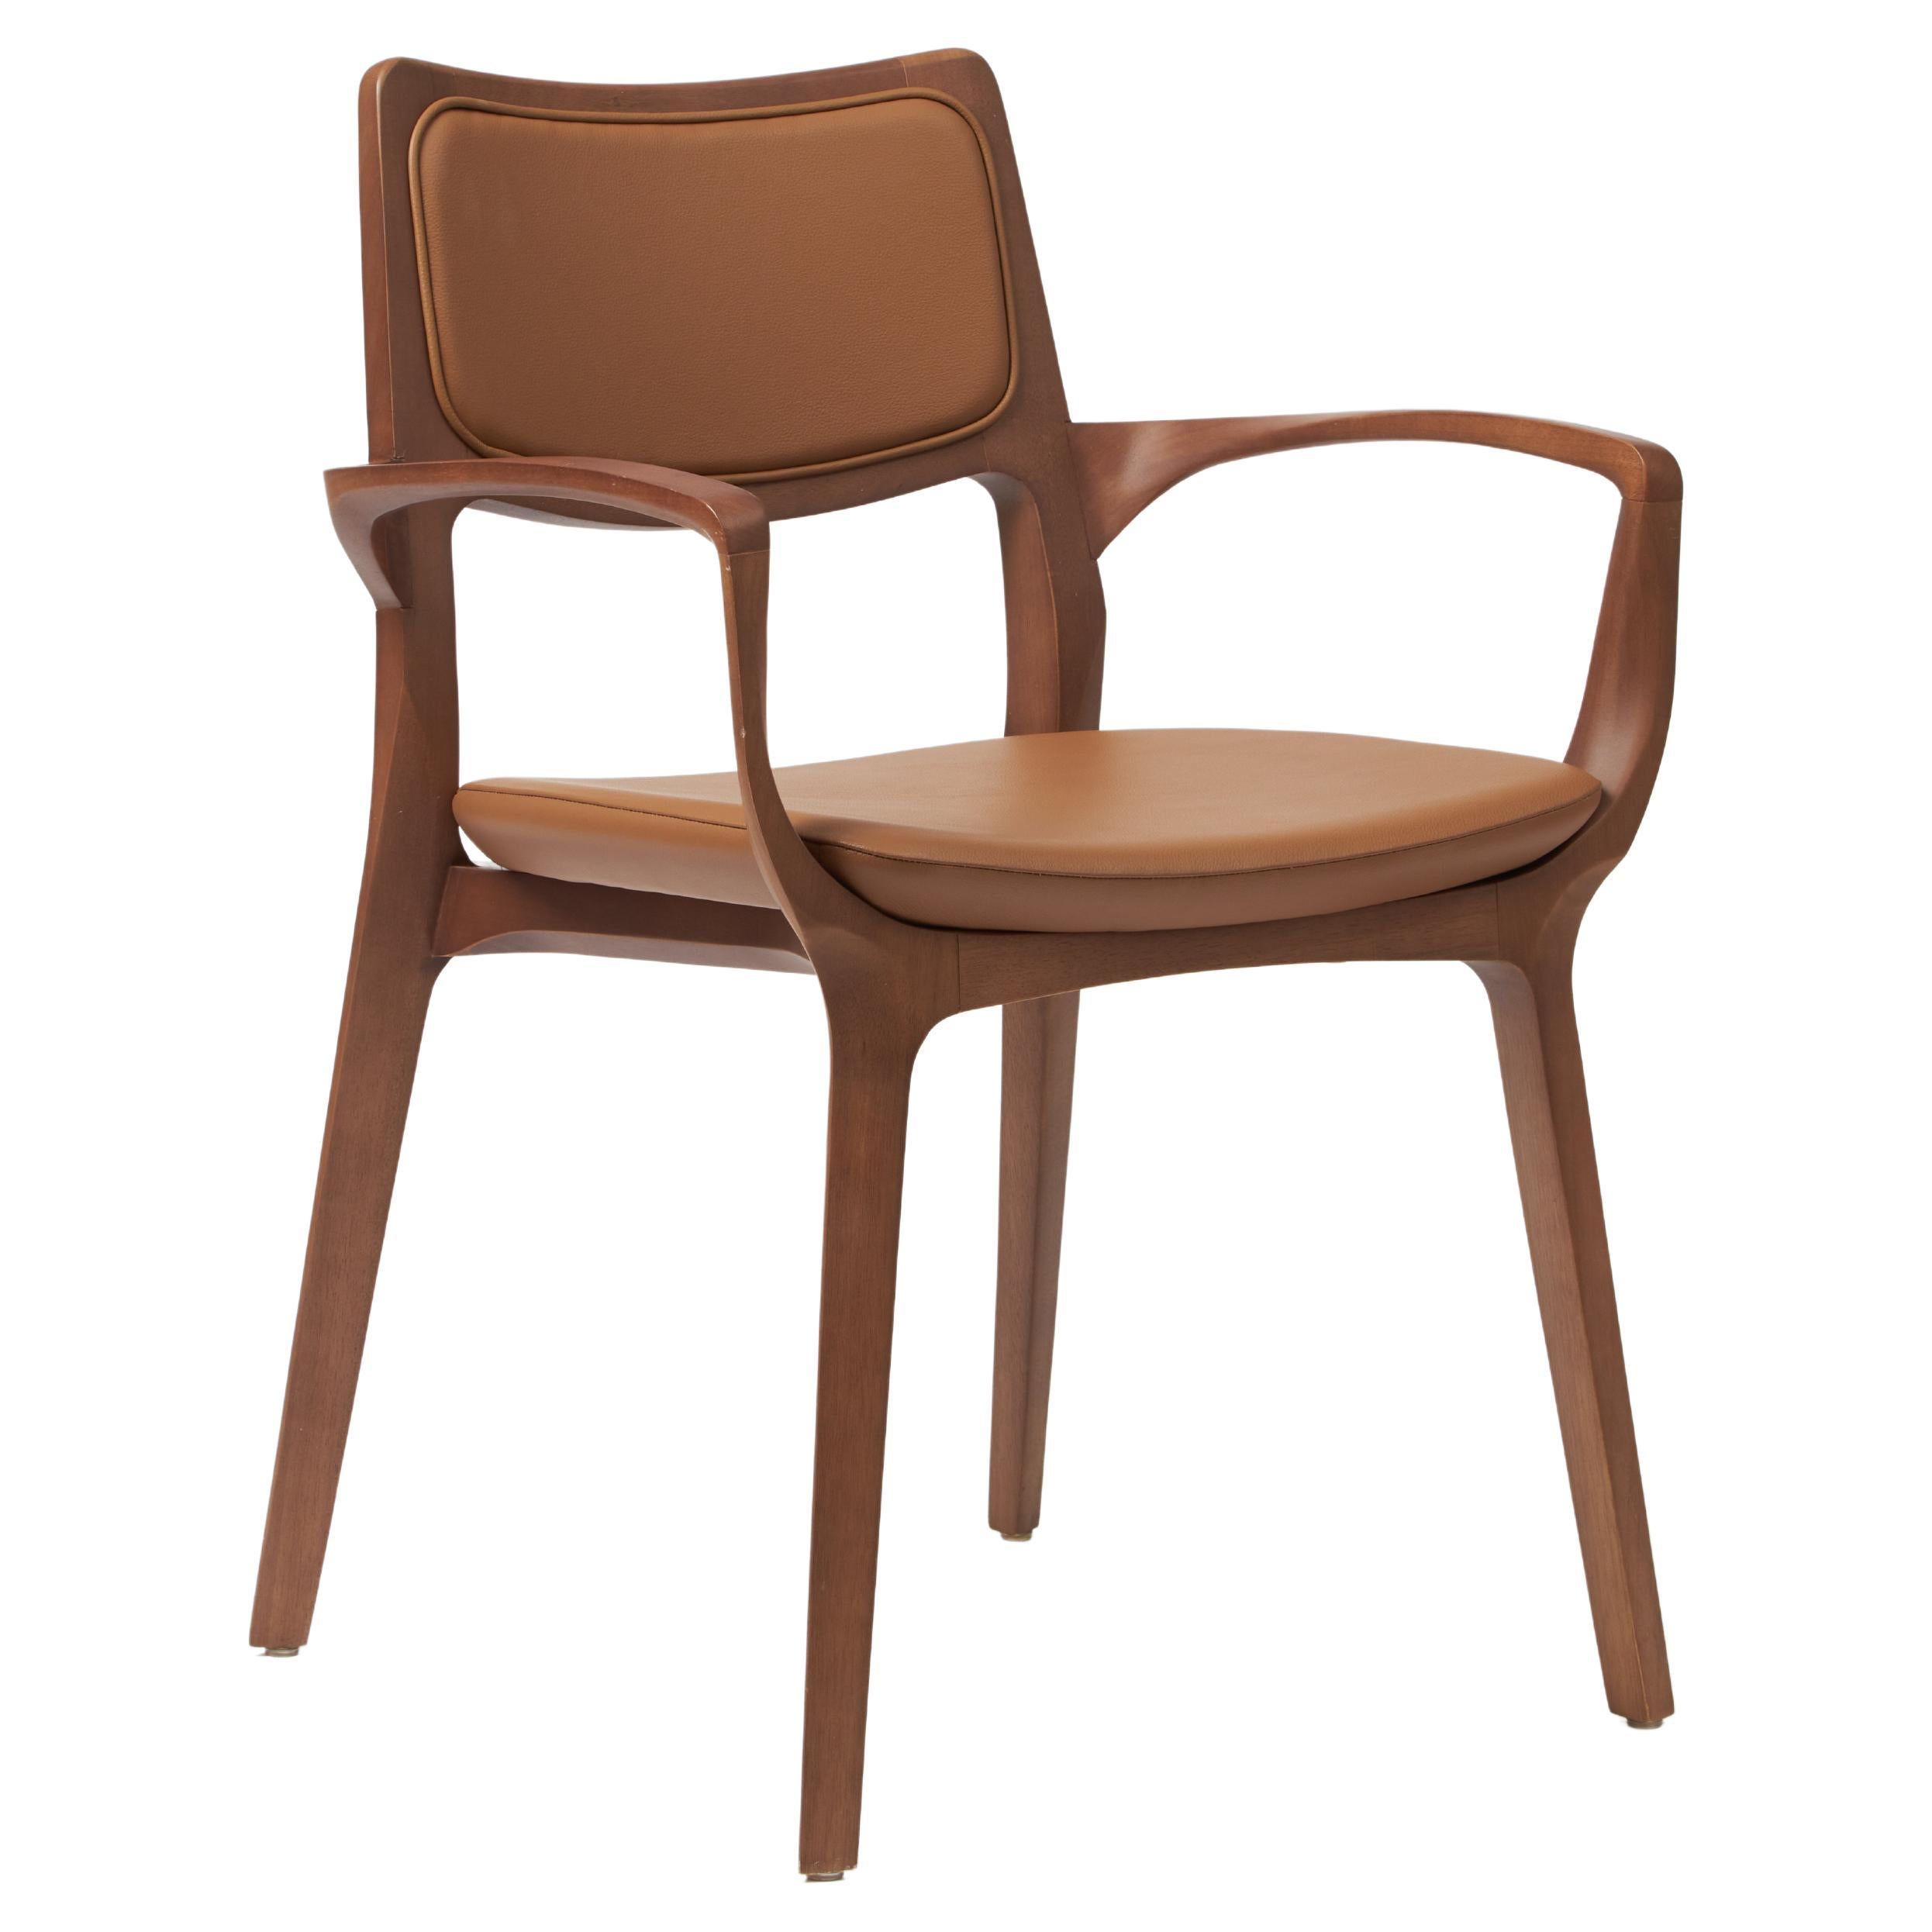 Modern Style Aurora Chair Sculpted in Walnut Finish Arms, leather back & seating